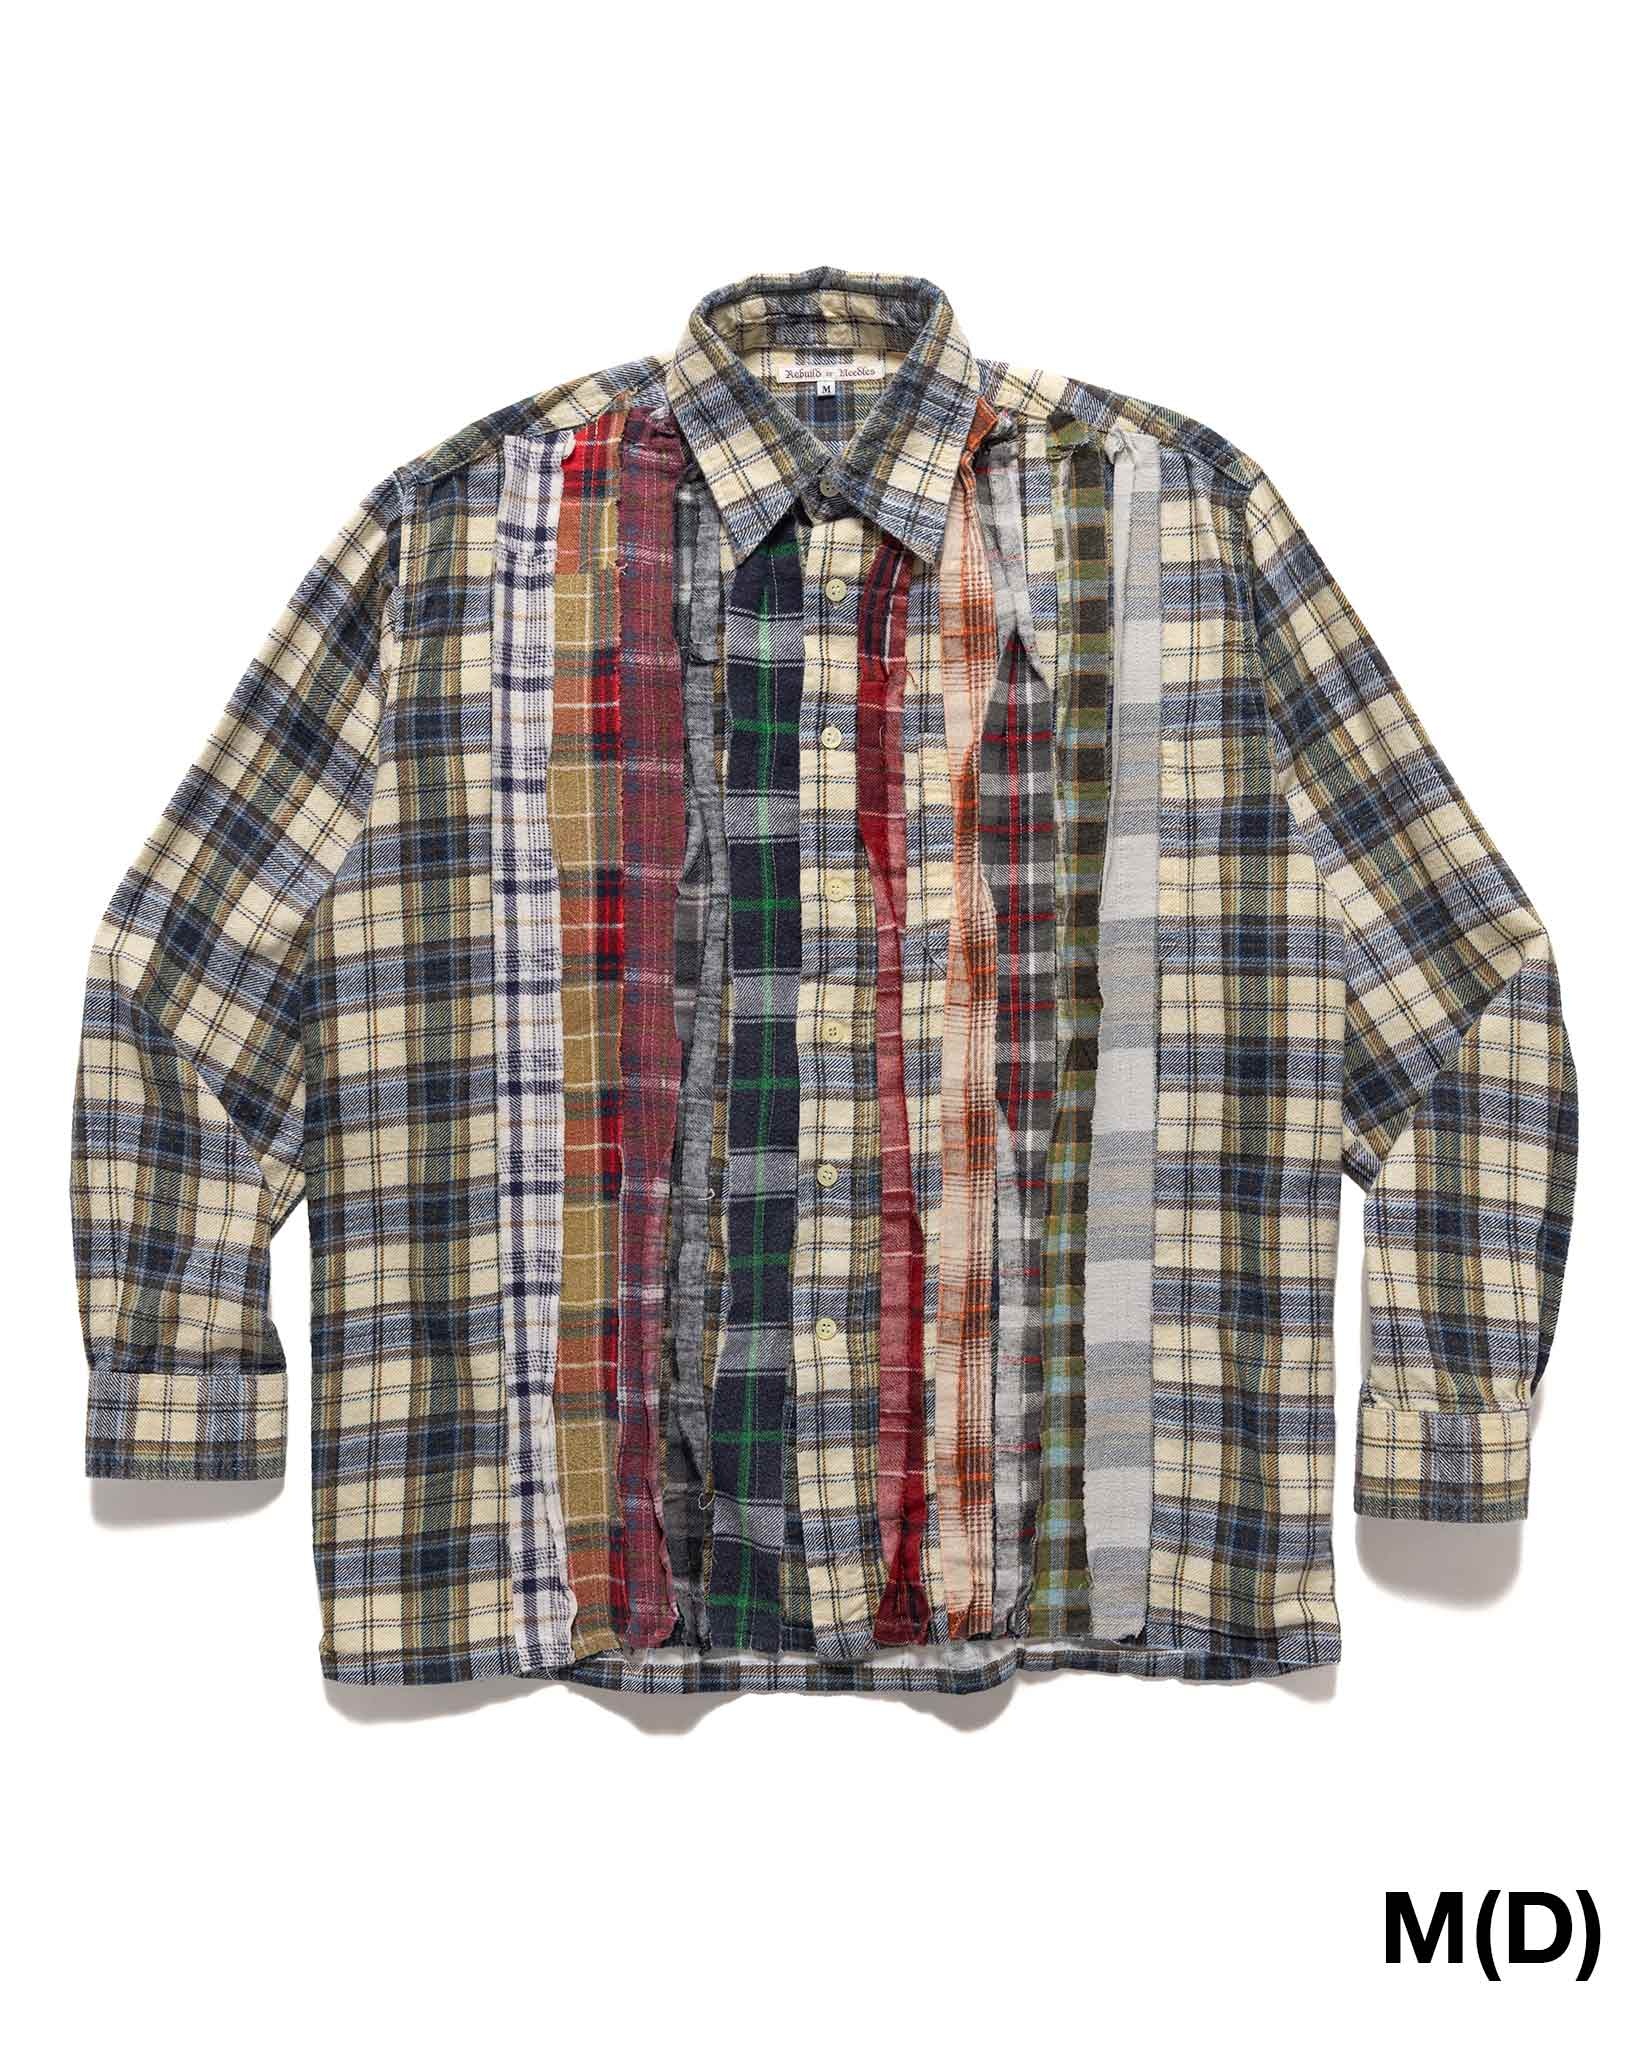 Rebuild by Needles Flannel Shirt -> Ribbon Shirt Assorted - 12